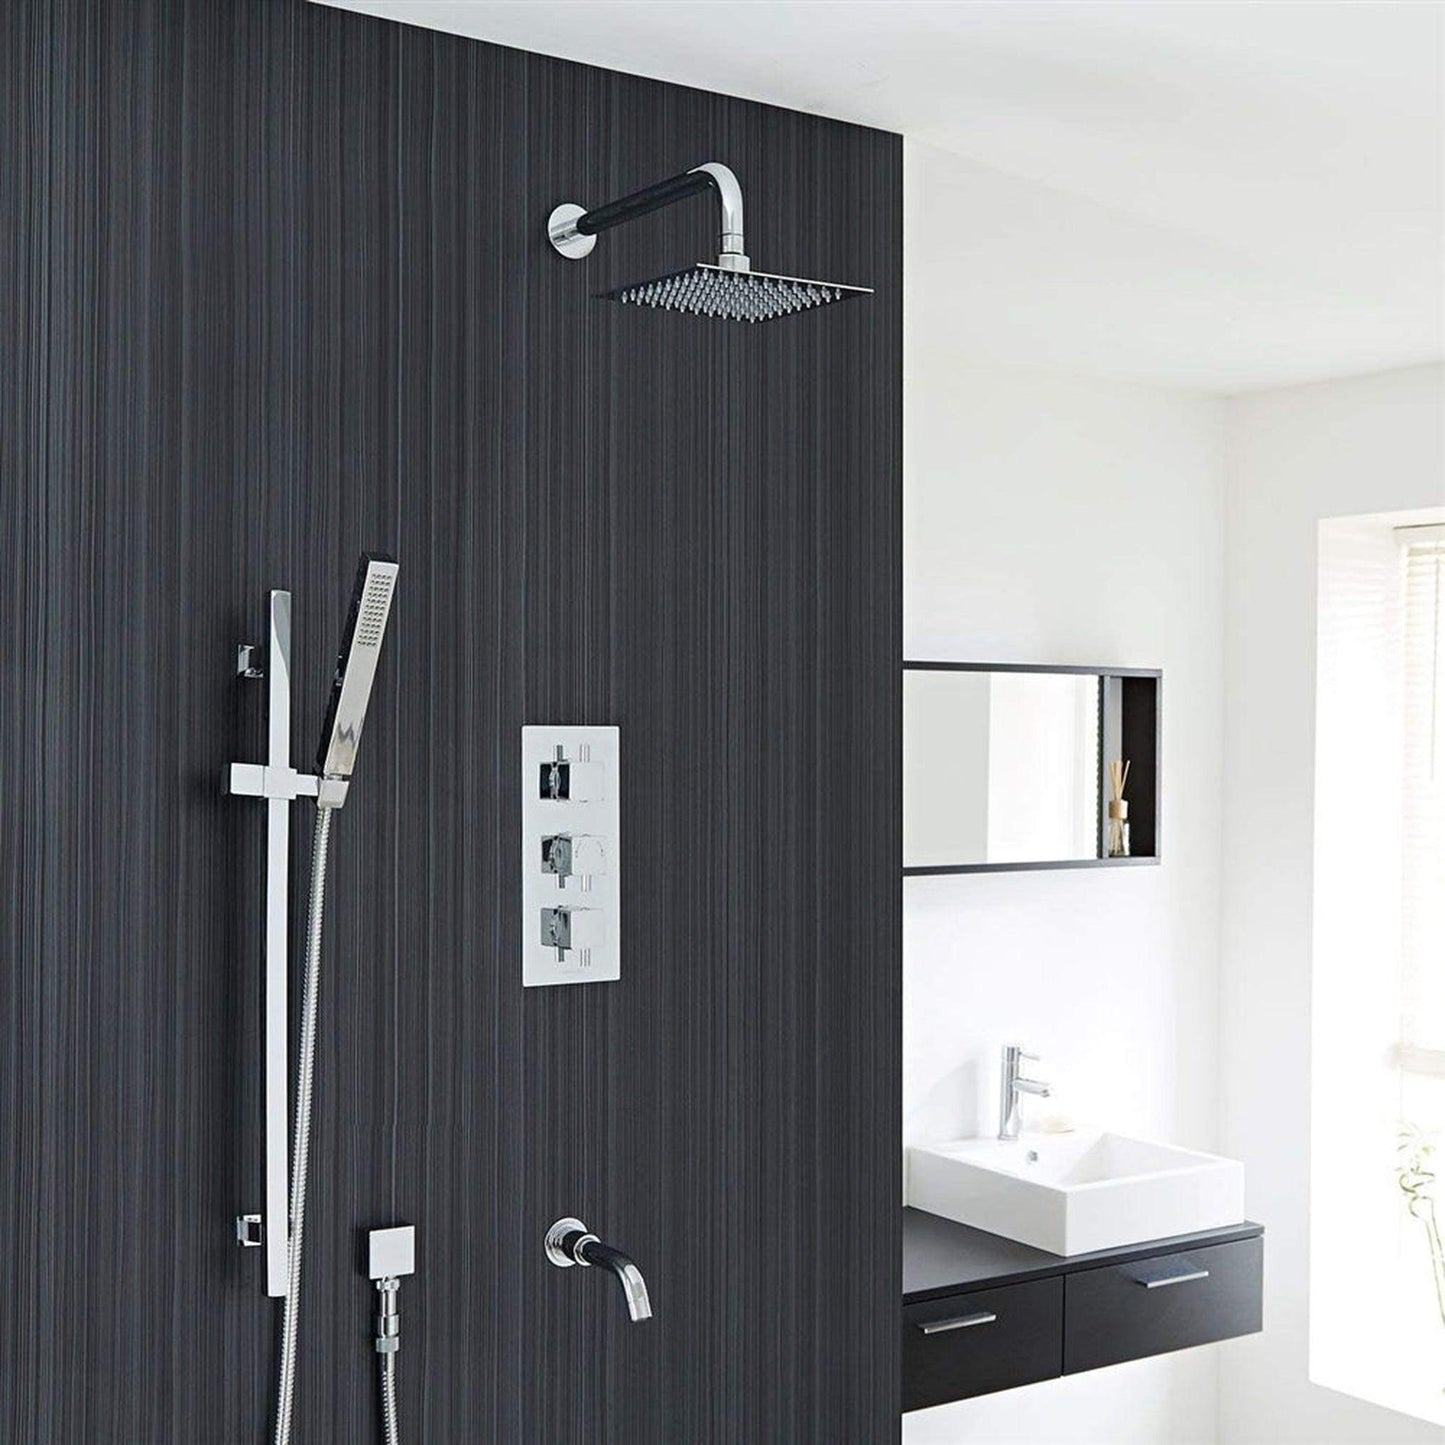 Fontana Liverpool Chrome 10" Wall-Mounted Thermostatic Rainfall Shower System With Hand Shower and Without Water Power LED Lights